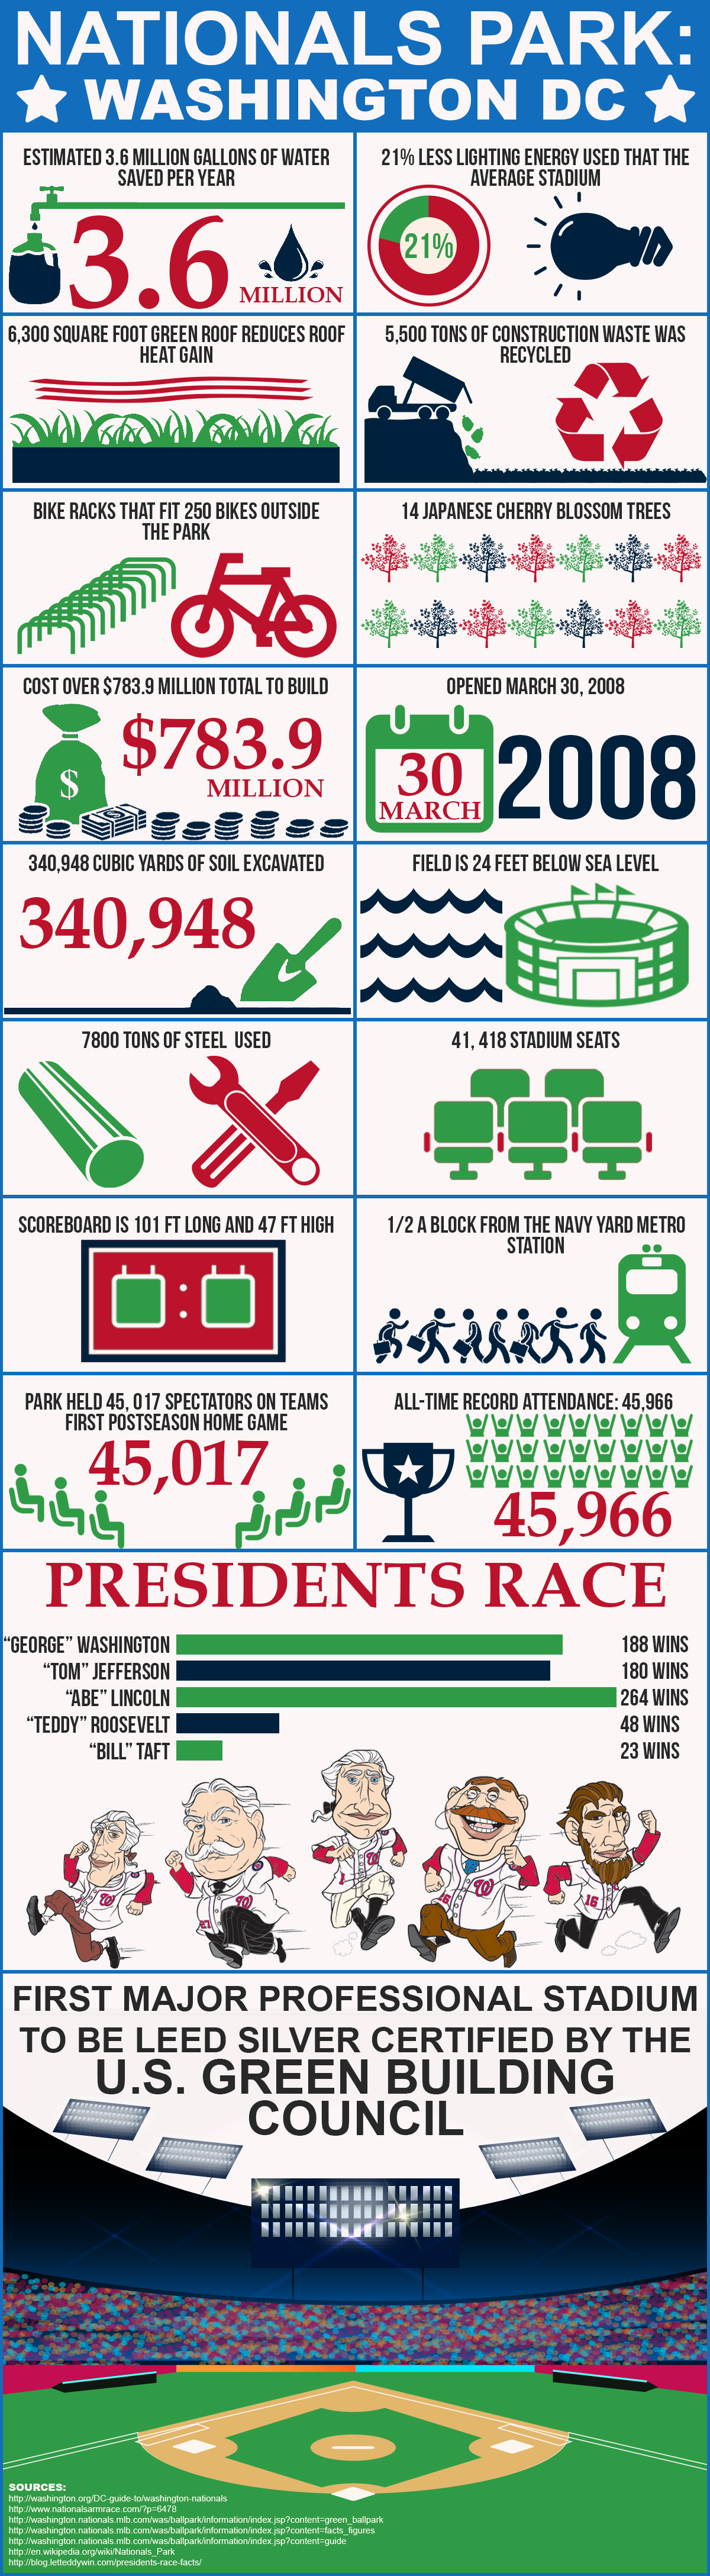 Fun Nats Stats for Opening Day | Infographic about the Washington Nationals and Nationals Park in Southeast Washington DC